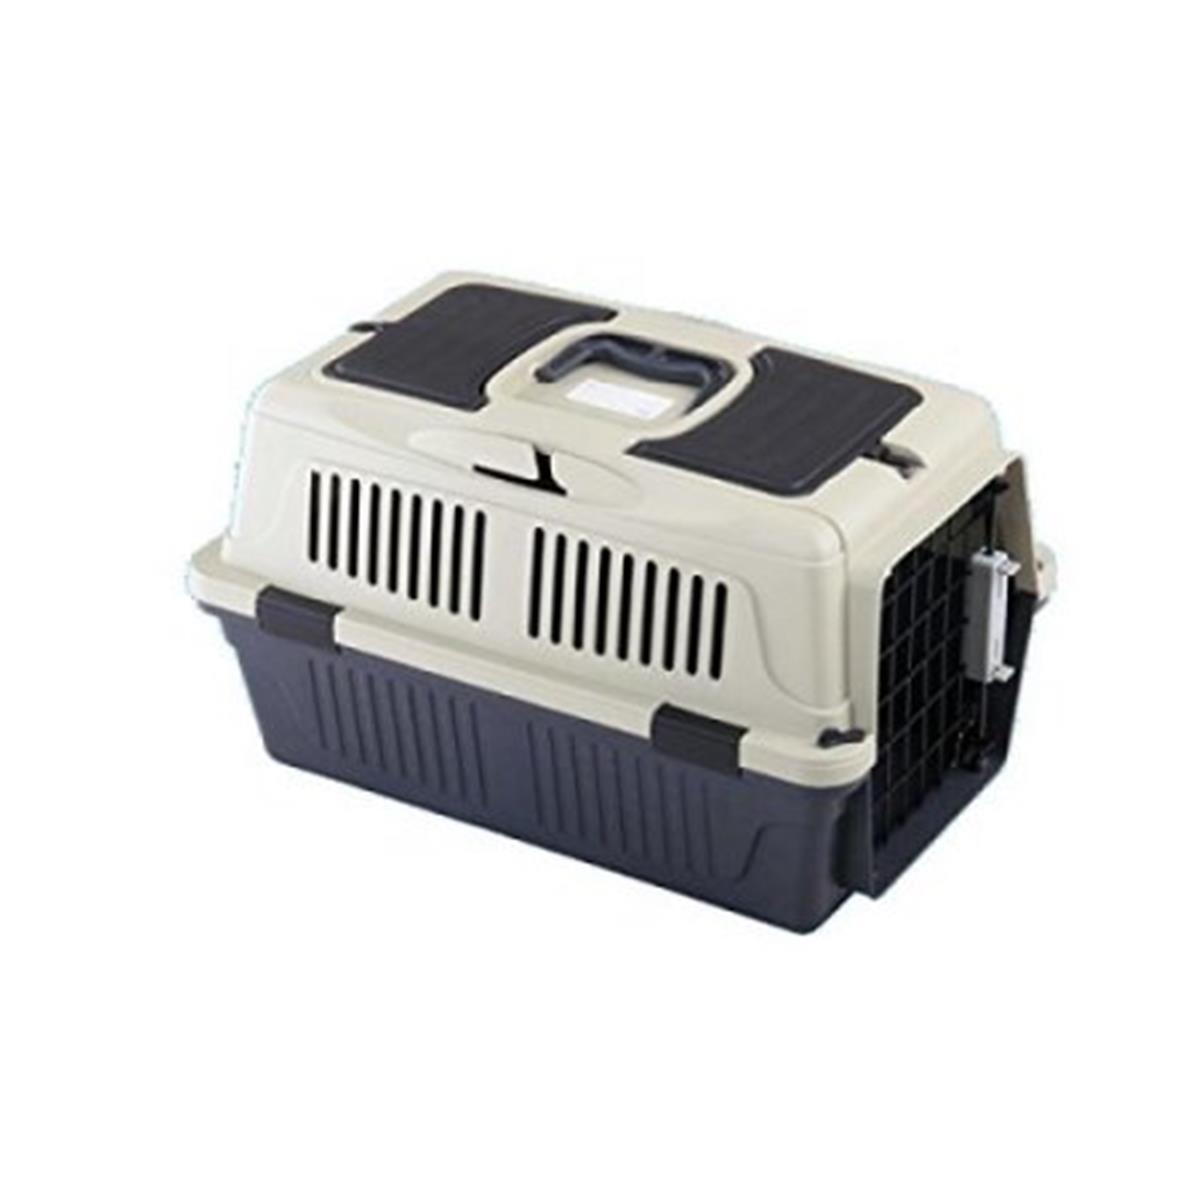 Picture of A&E Cage CD-4 Assorted 25 x 16 x 16 in. Deluxe Pet Carrier with Storage Compartment 